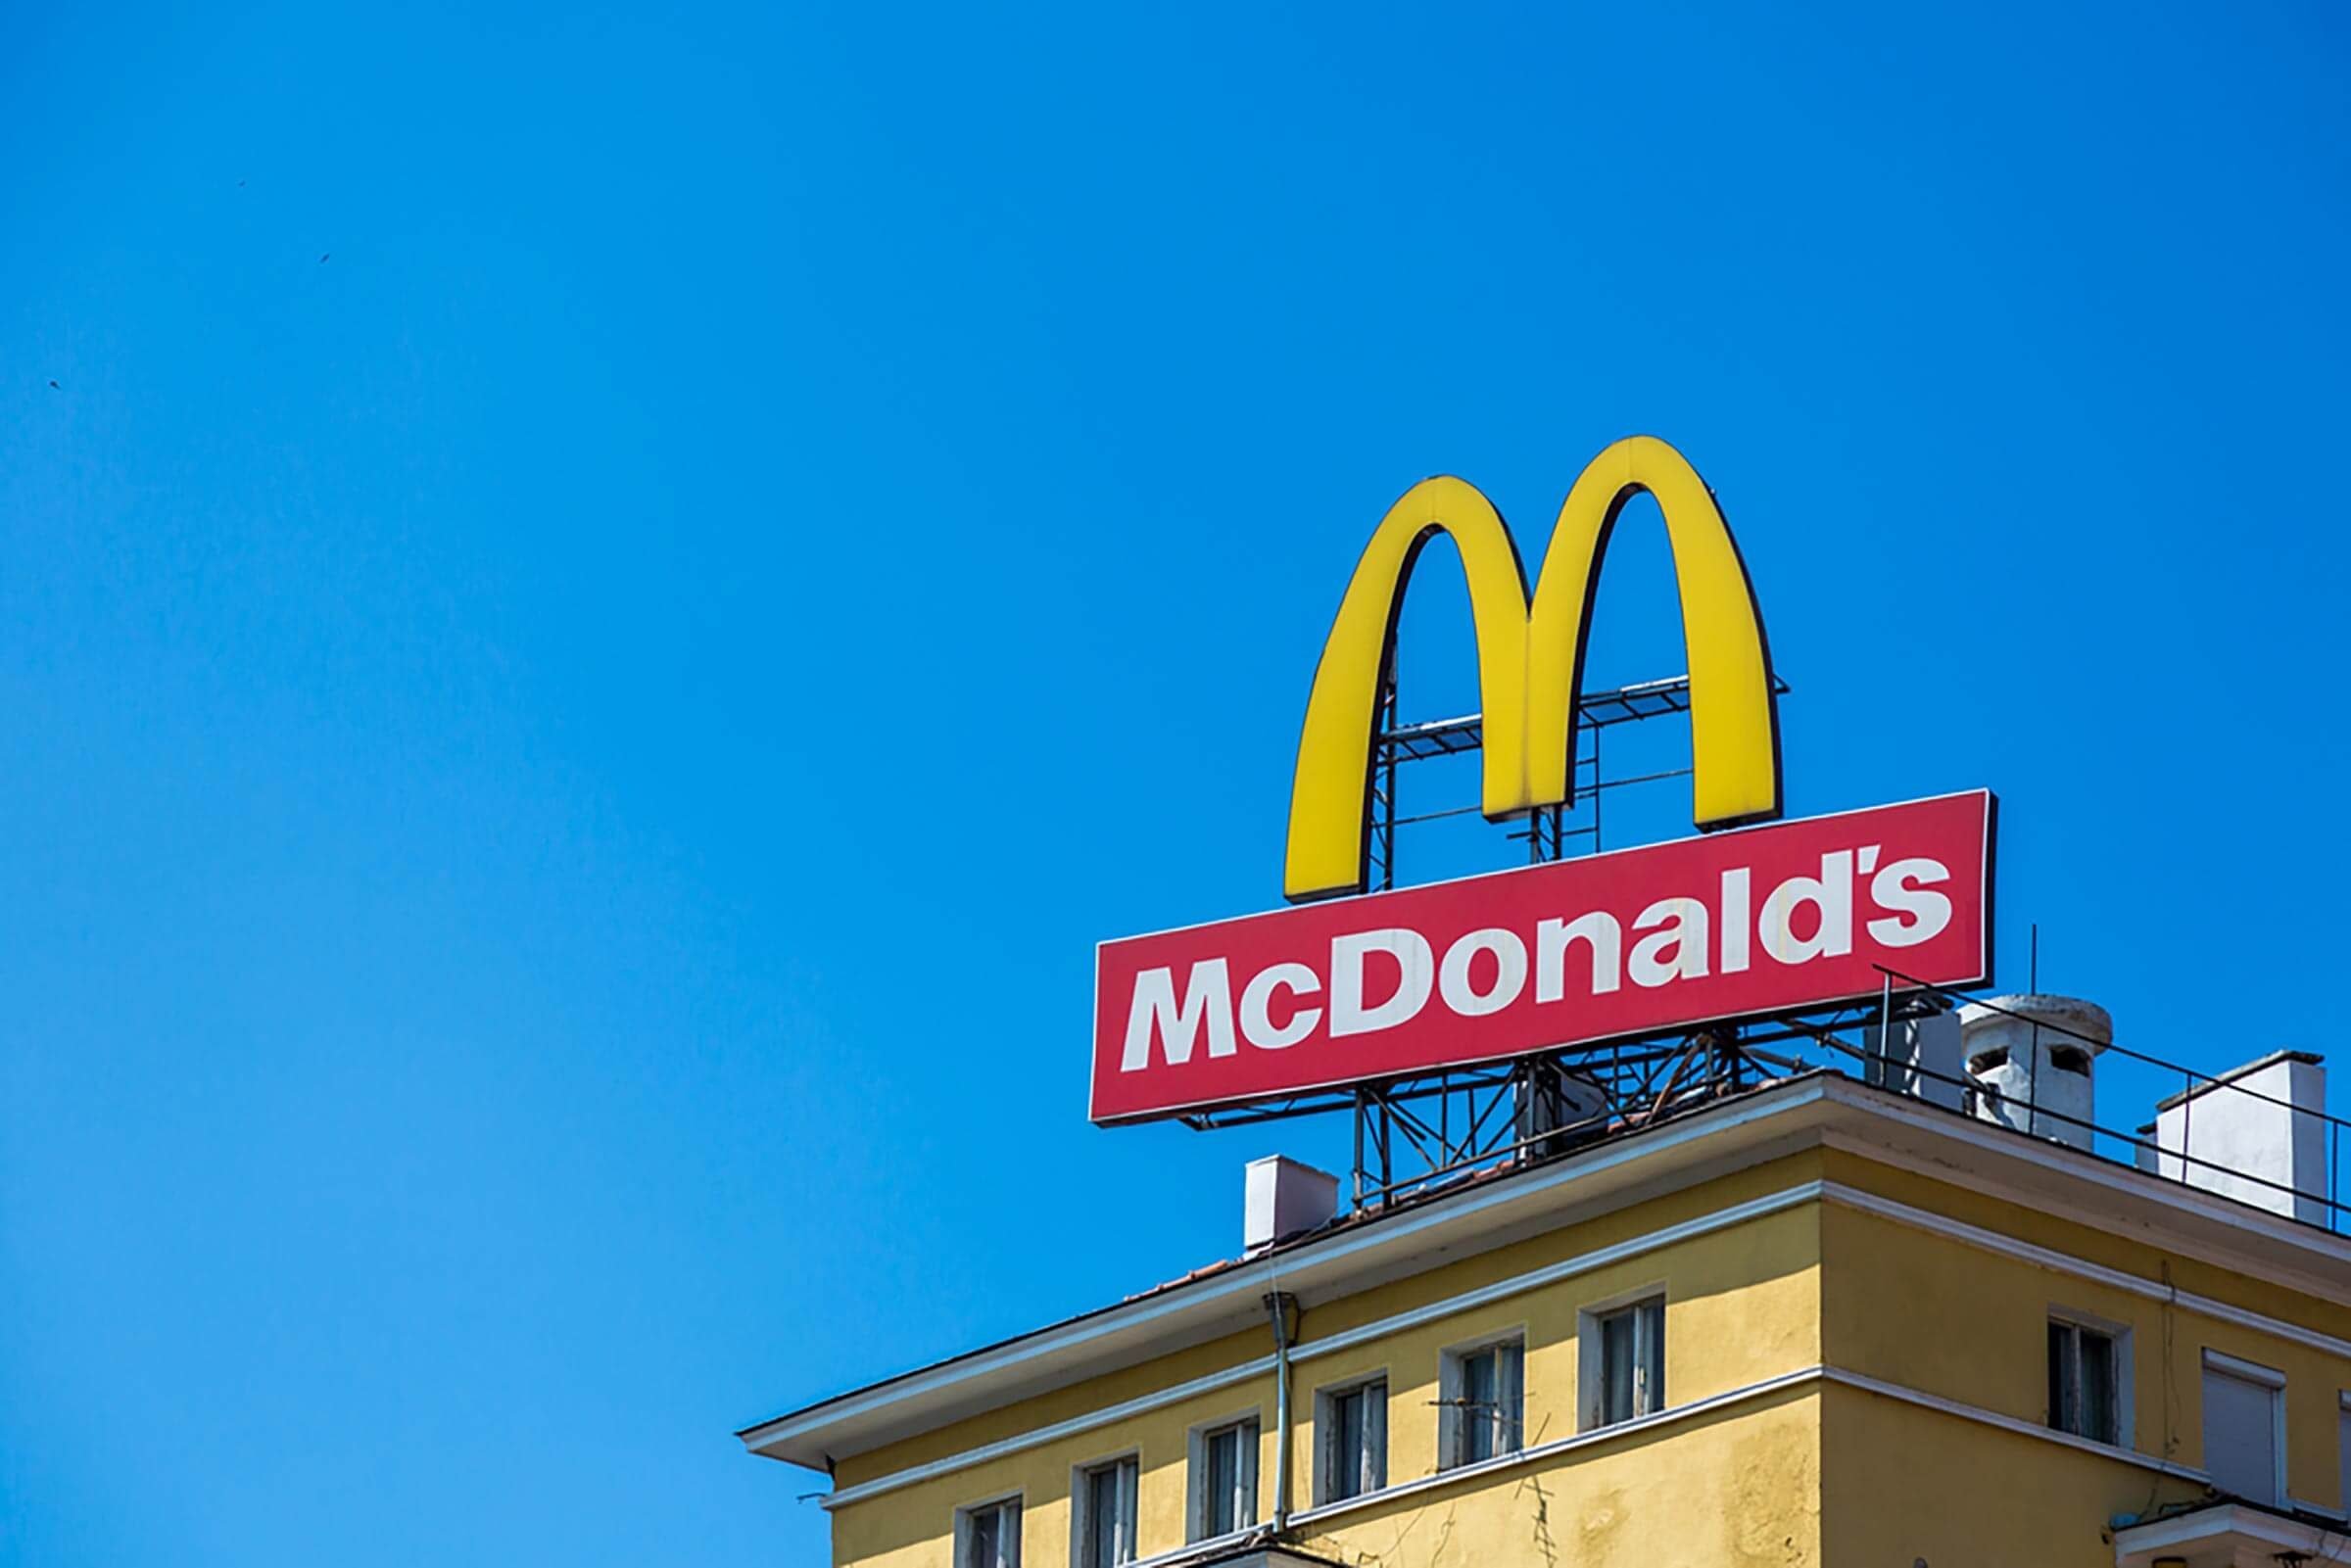 This Is Only U.S. State Capital Without a McDonald's